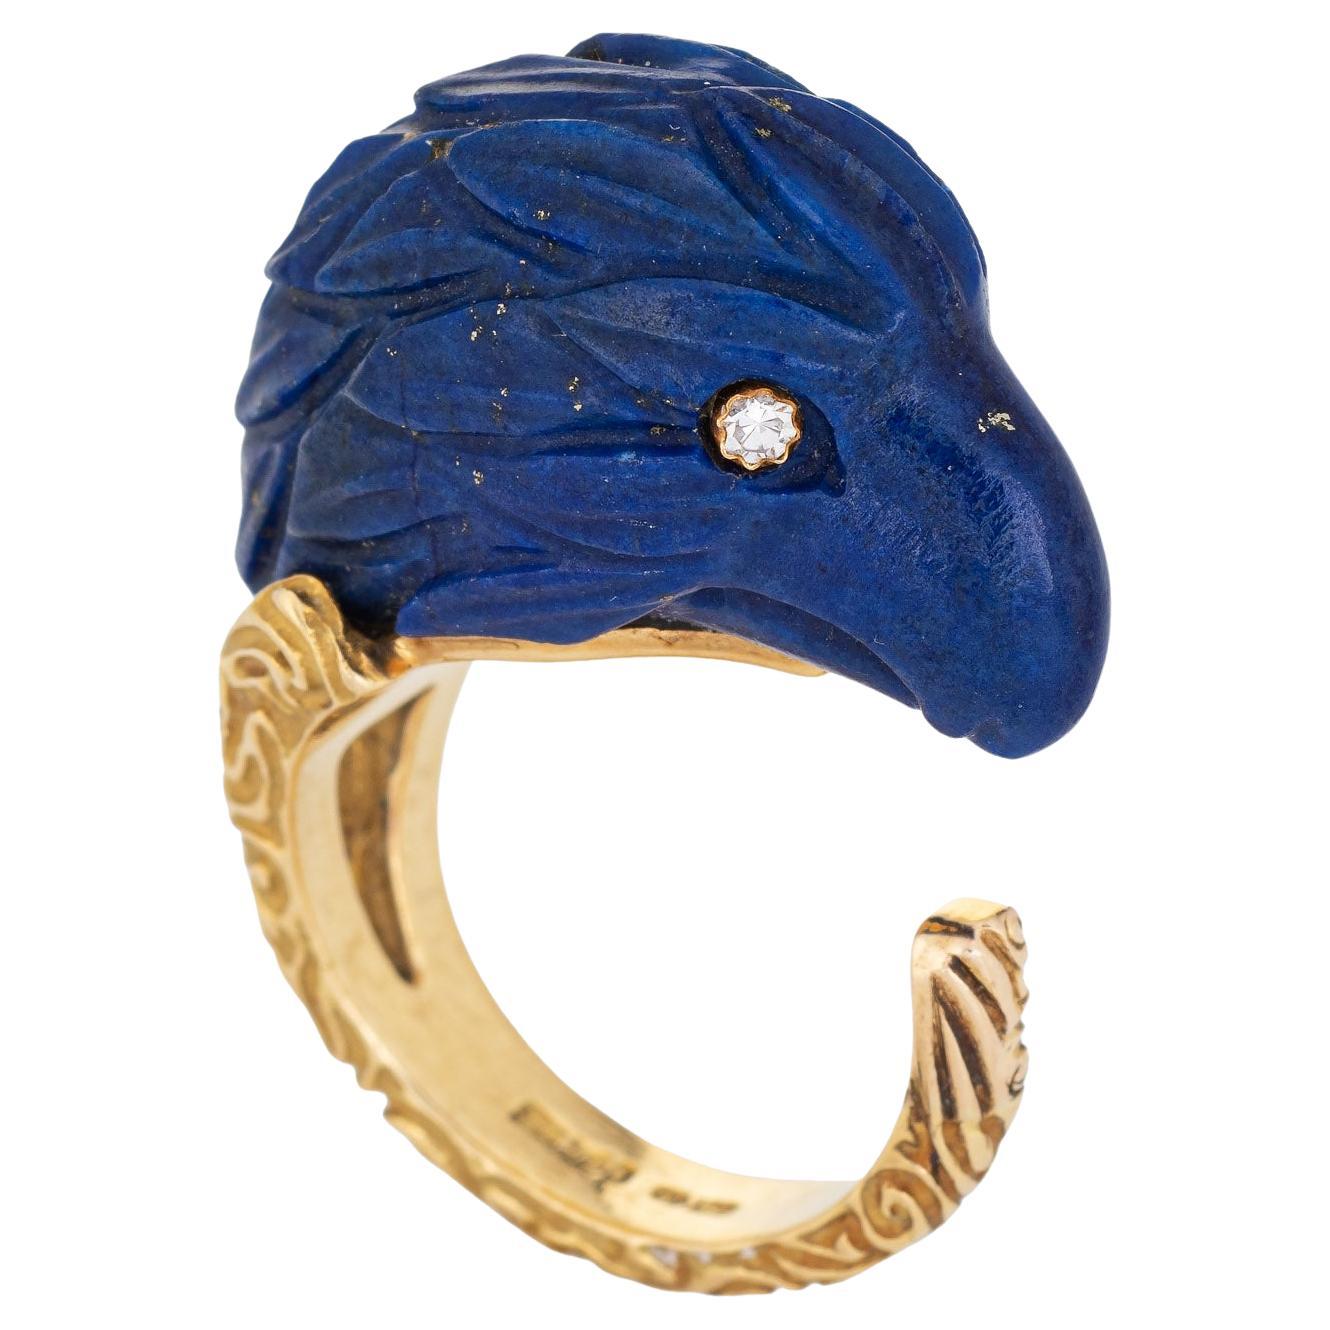 American Bald Eagle Ring Carved Lapis Lazuli 18k Yellow Gold Vintage Jewelry 5 For Sale